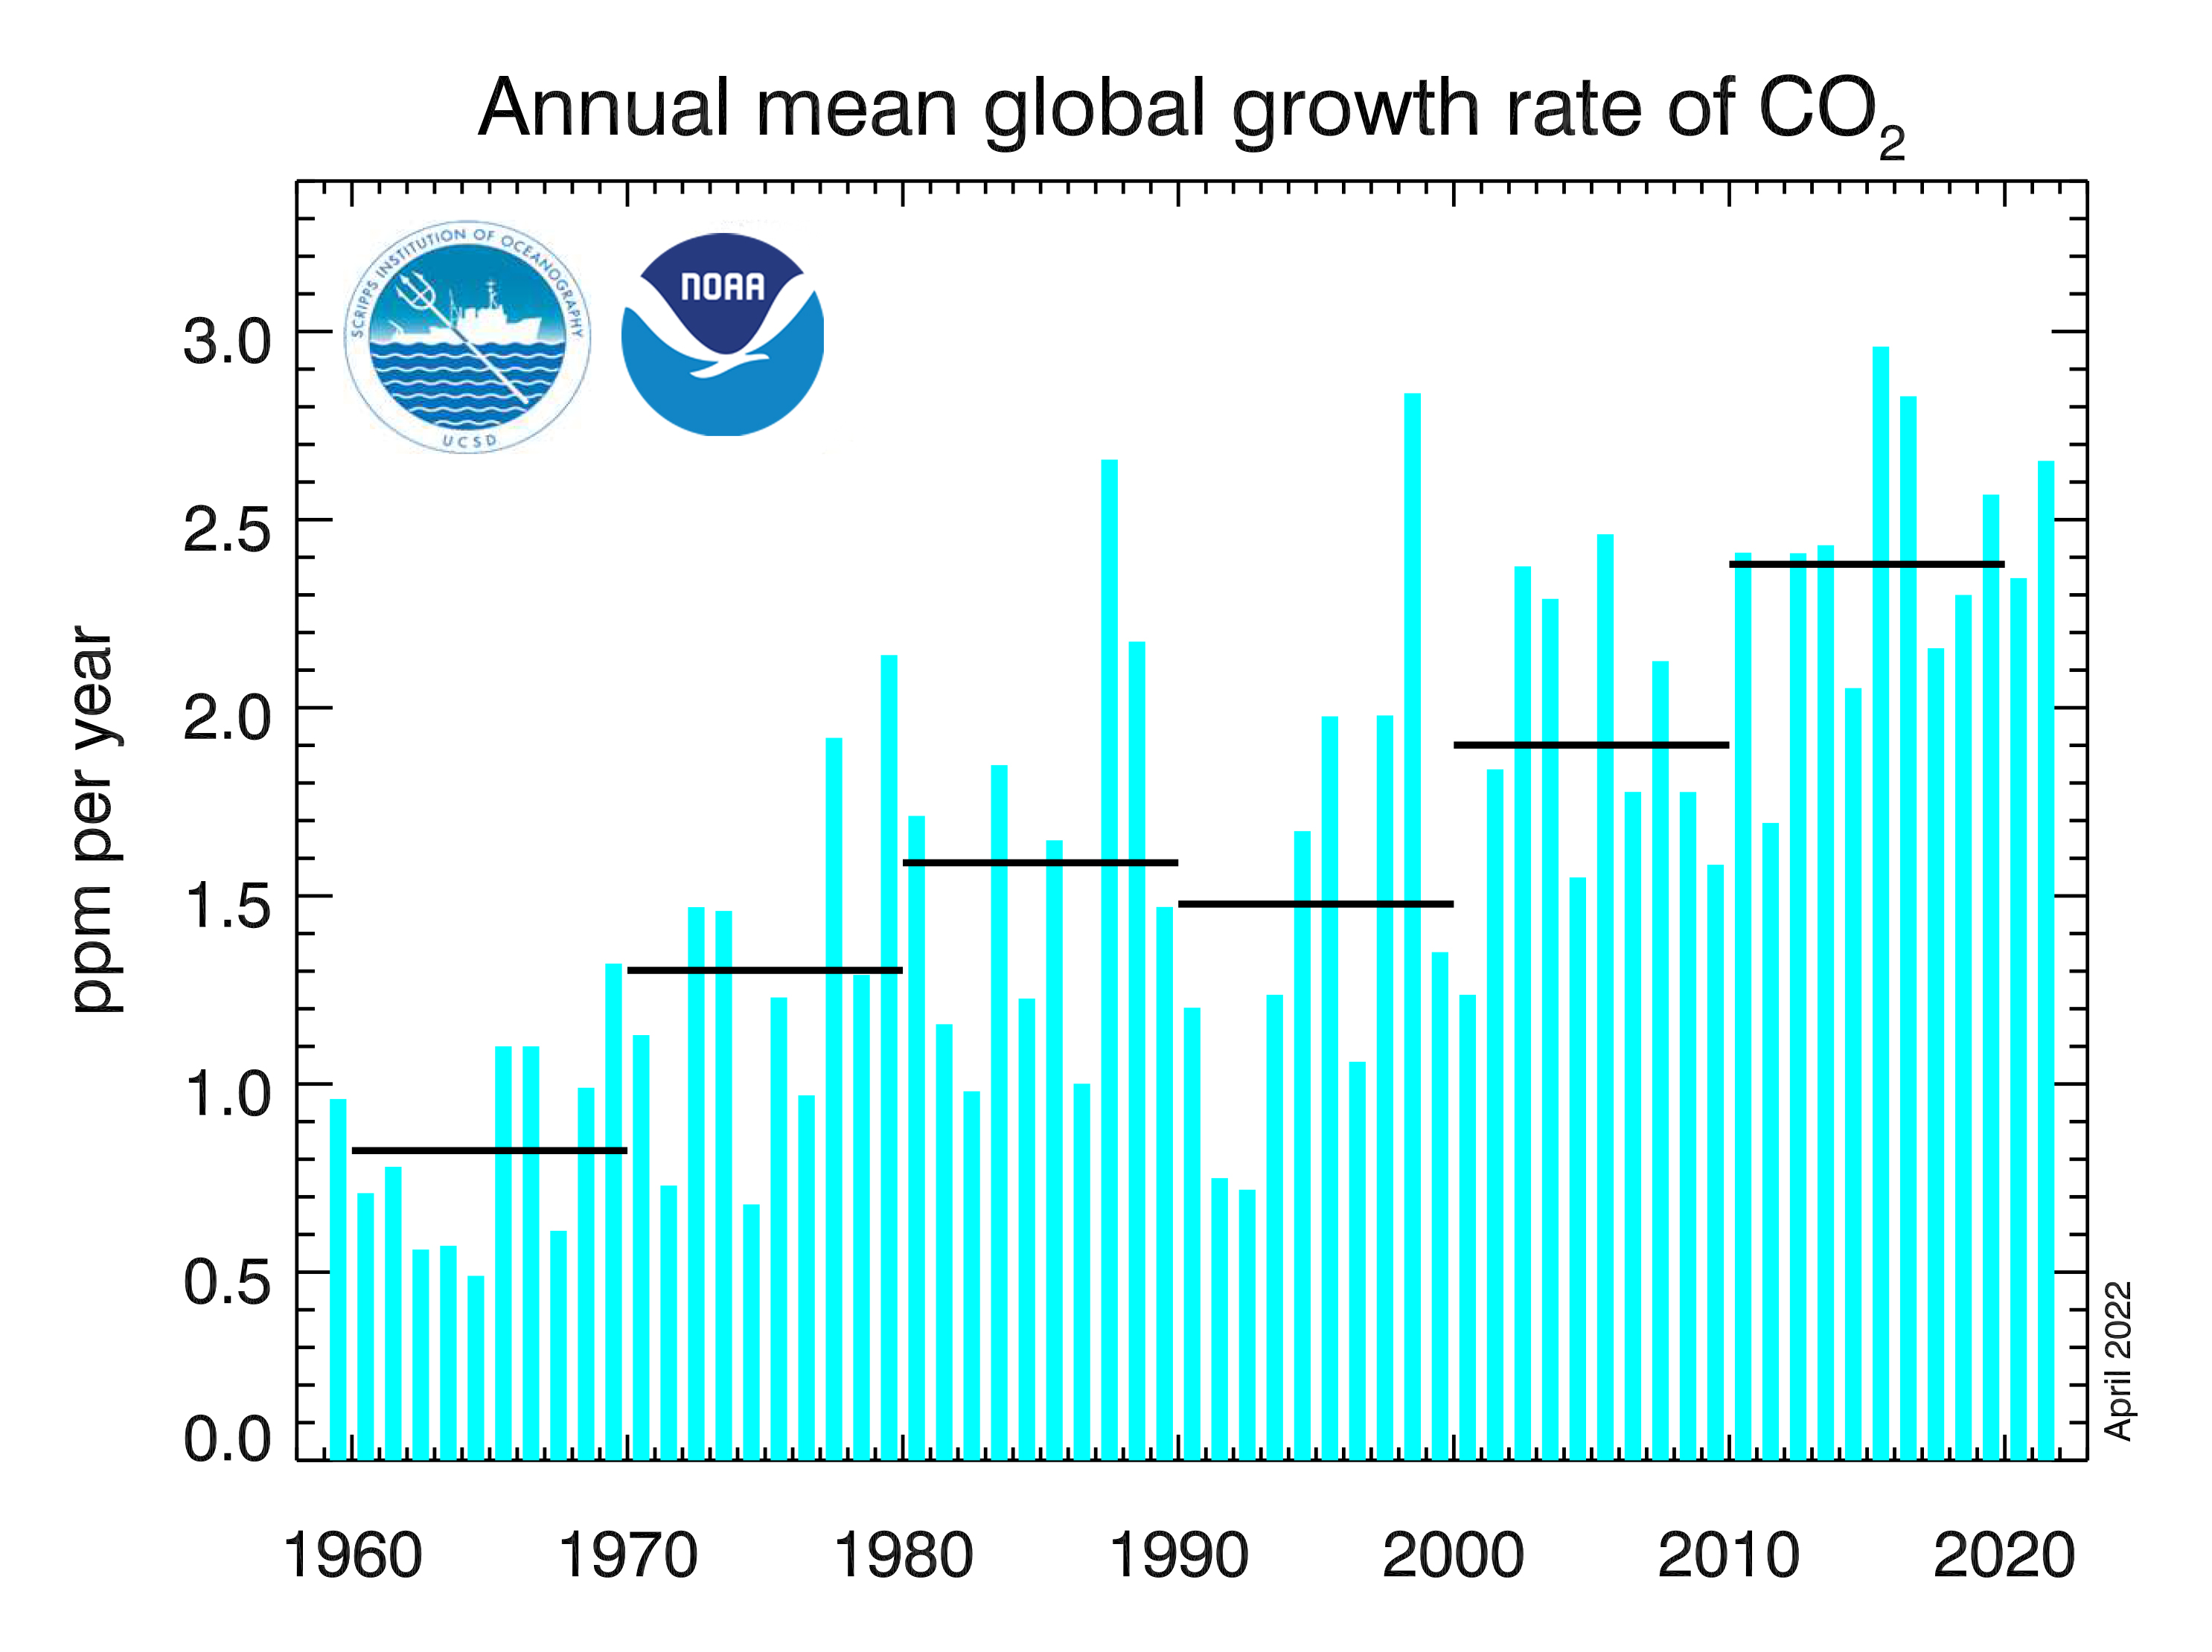 CO2 data: This graph shows annual mean carbon dioxide growth rates, based on globally averaged marine surface data, since the start of systematic monitoring in 1959. The horizontal lines indicate the decadal averages of the growth rate. 